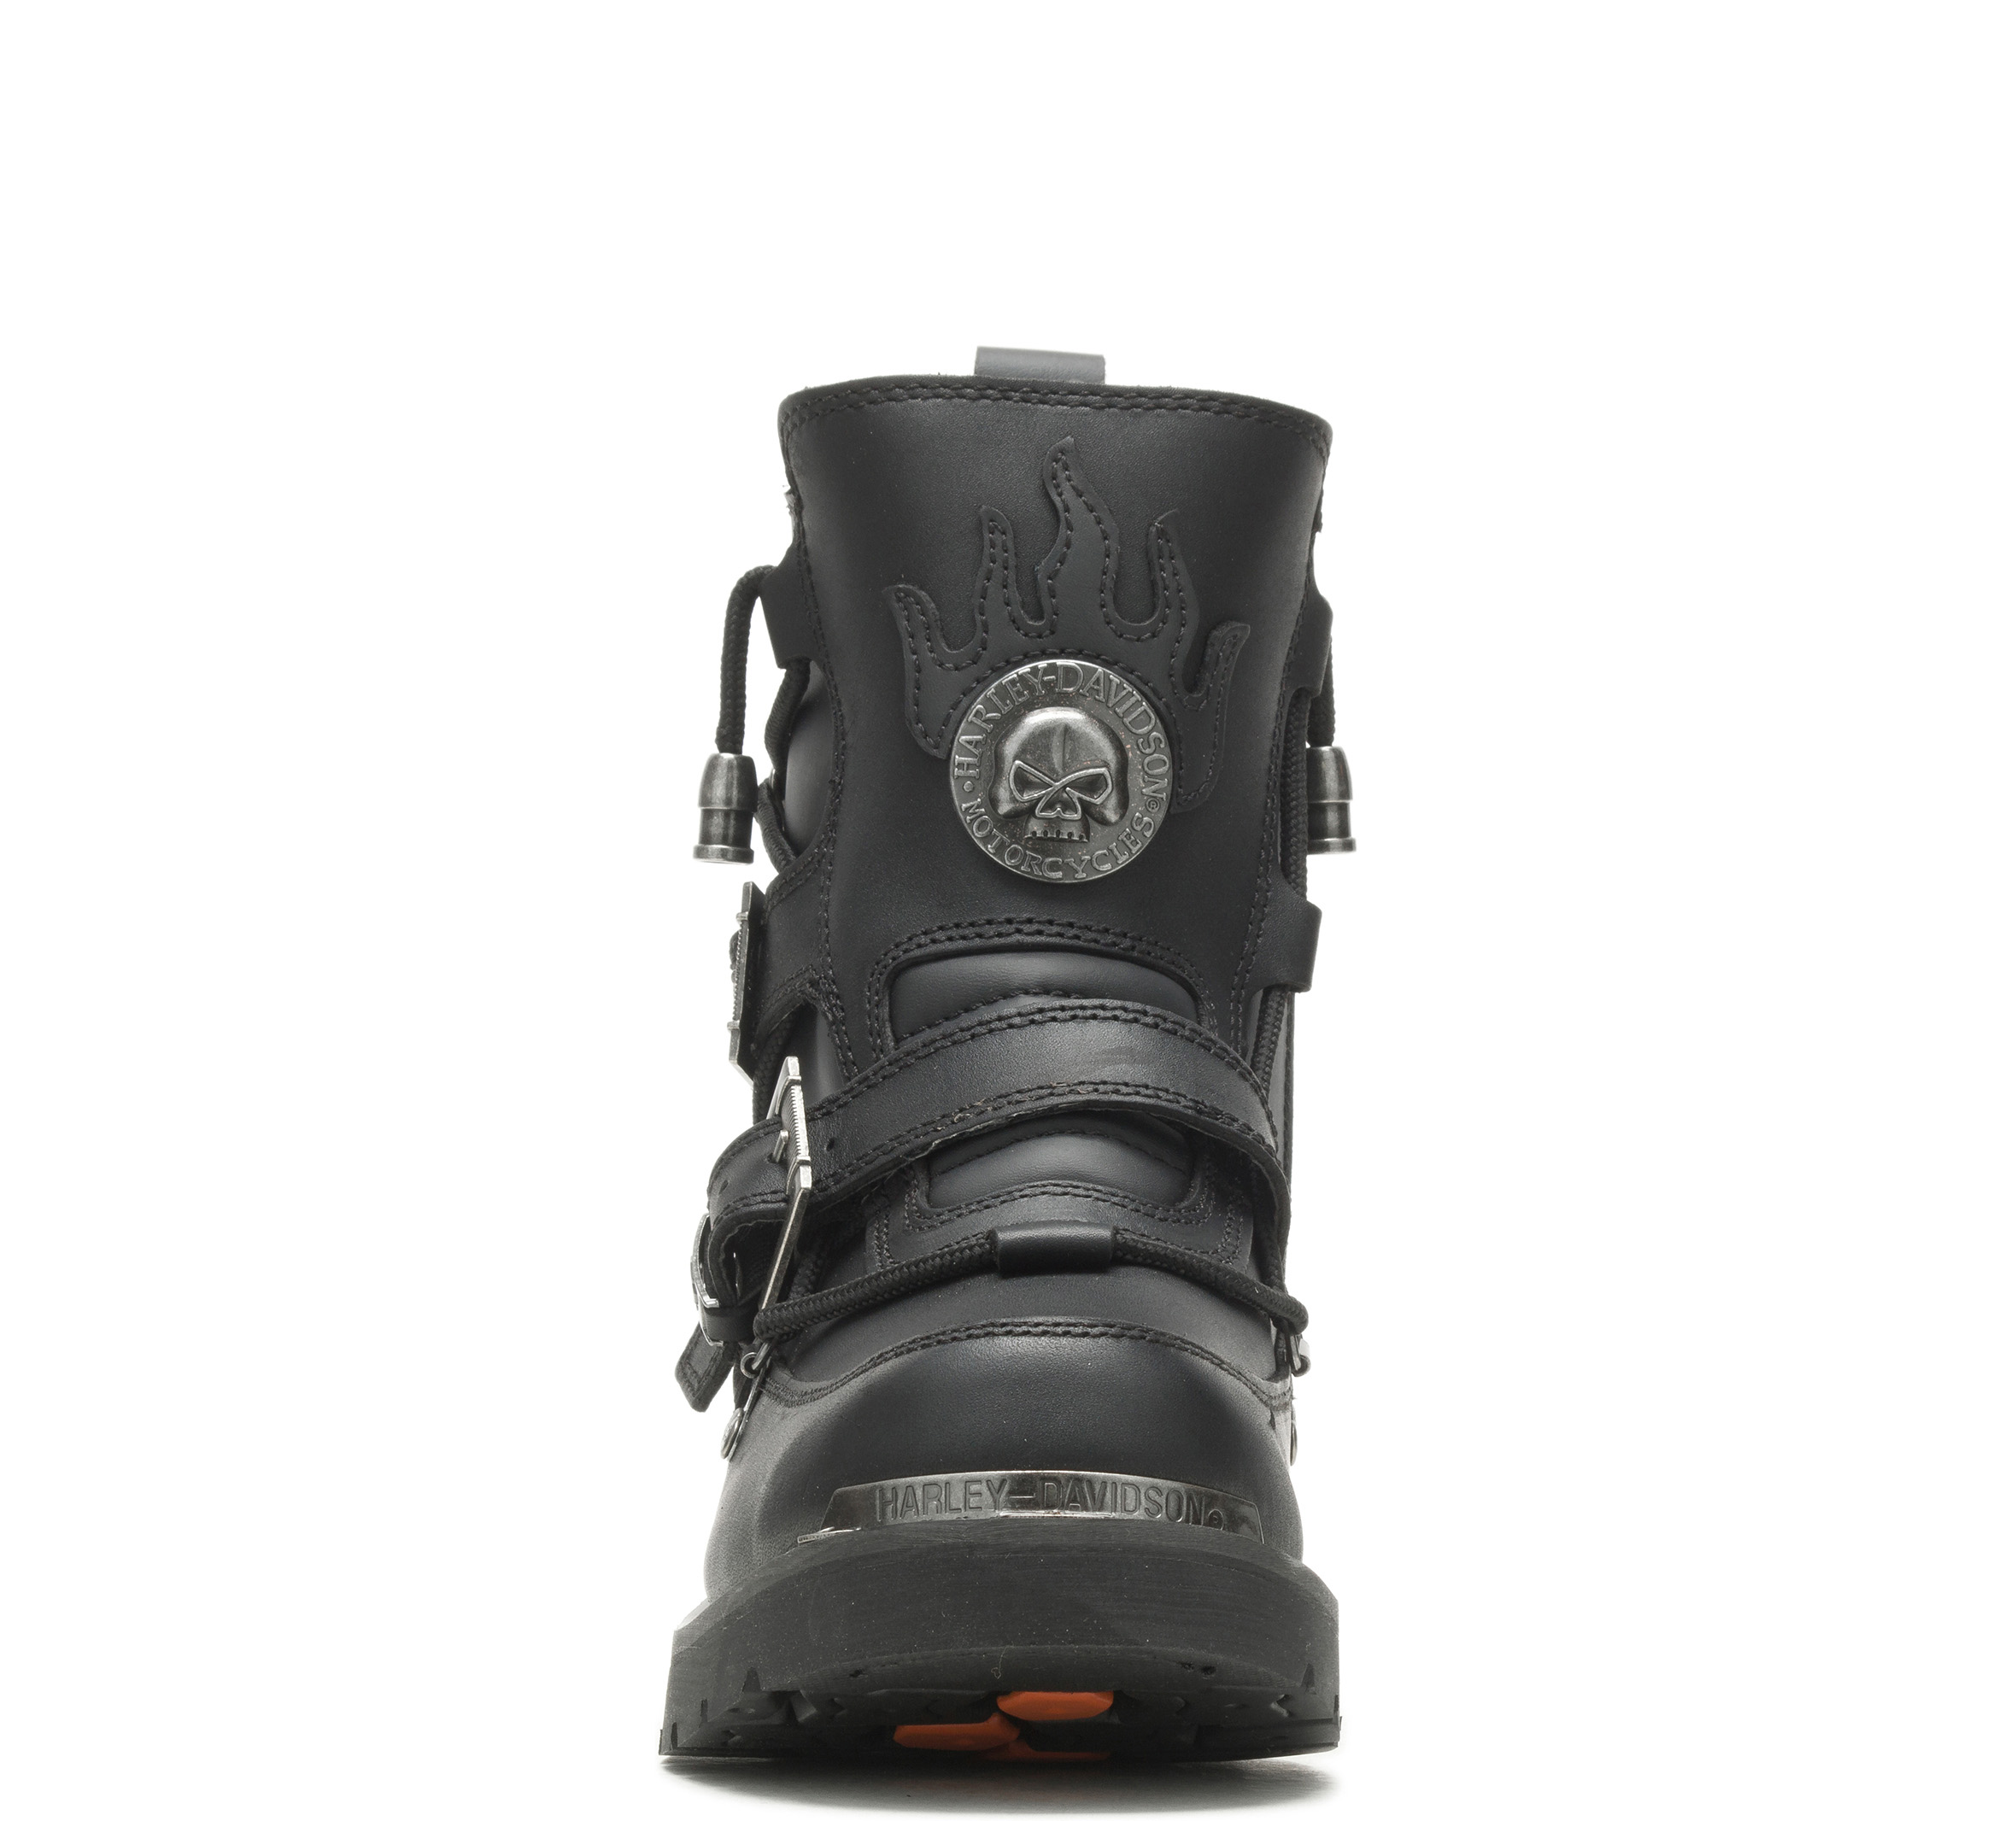 Men's Distortion Riding Boots